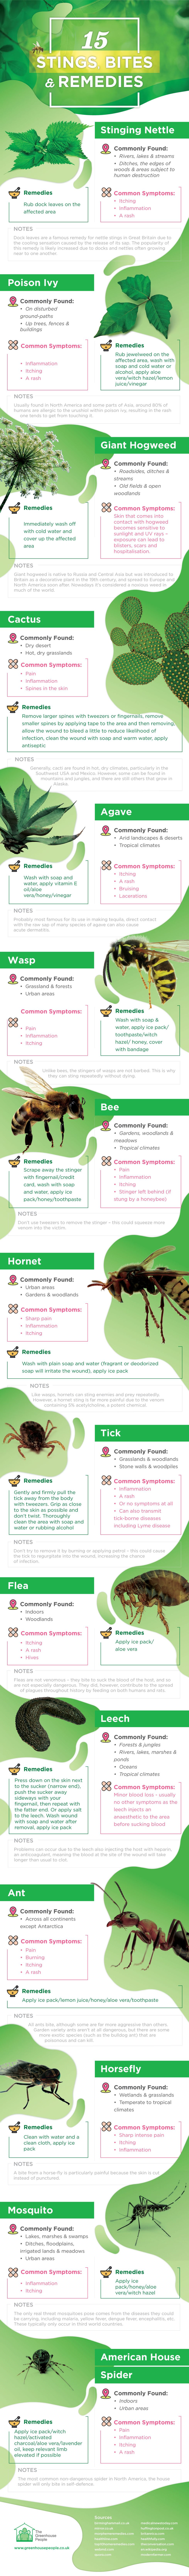 insect bites and plant stings remedies - The Greenhouse People